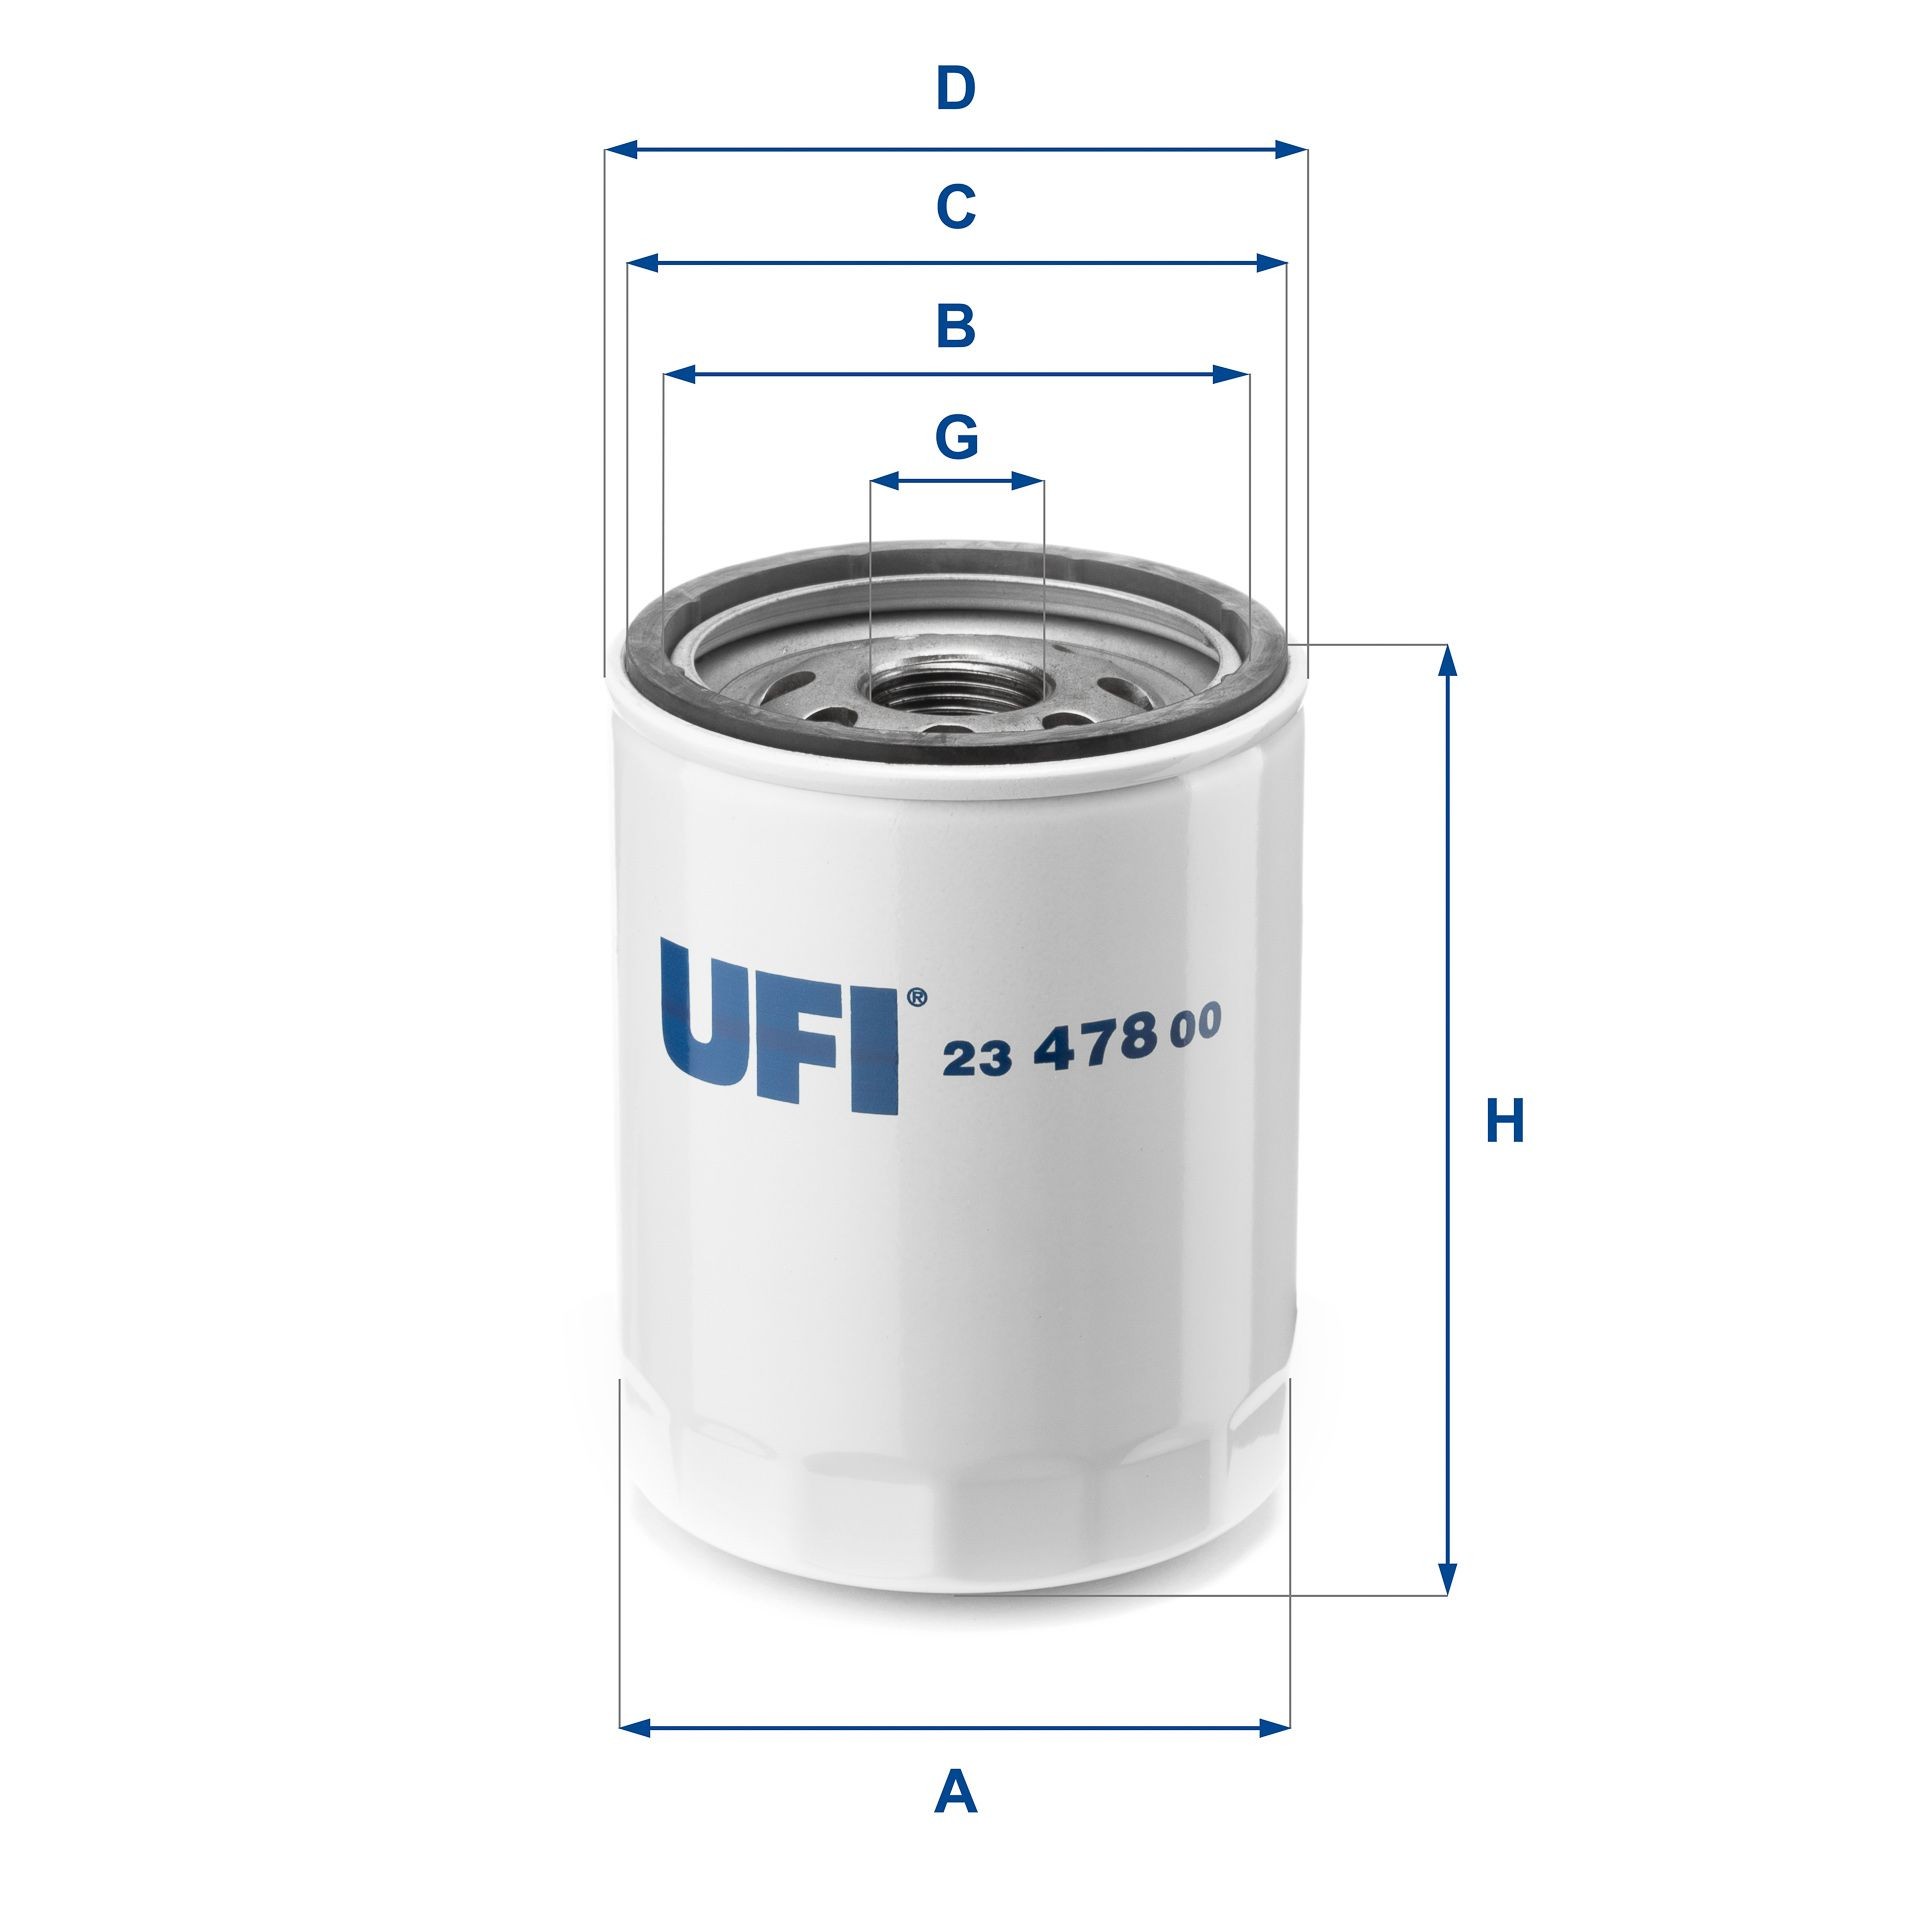 23.478.00 UFI Oil filters MITSUBISHI M 20 X 1,5, Spin-on Filter